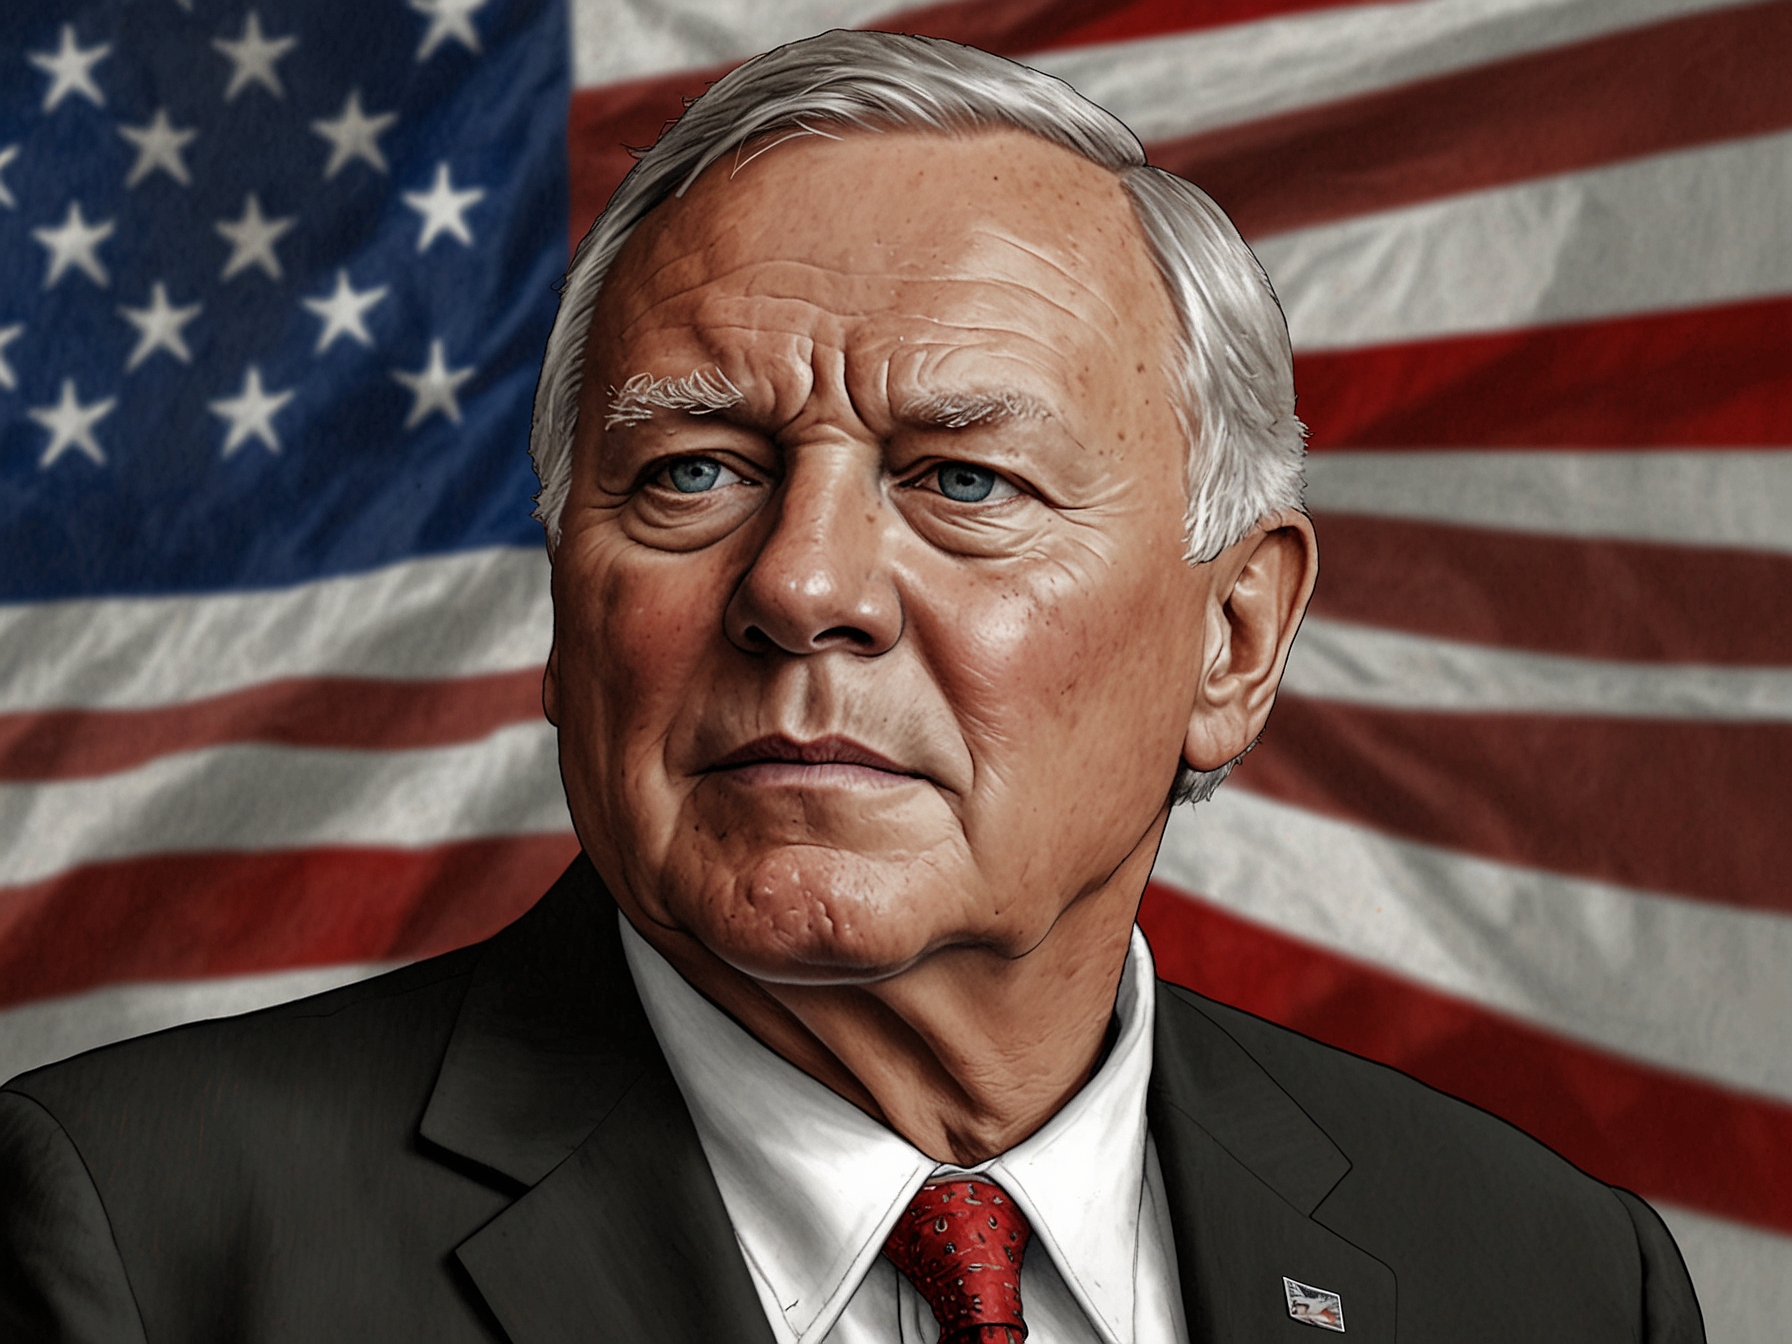 Former Governor Nathan Deal speaks at a public forum about election security measures, stressing the importance of electoral integrity in maintaining democratic values.